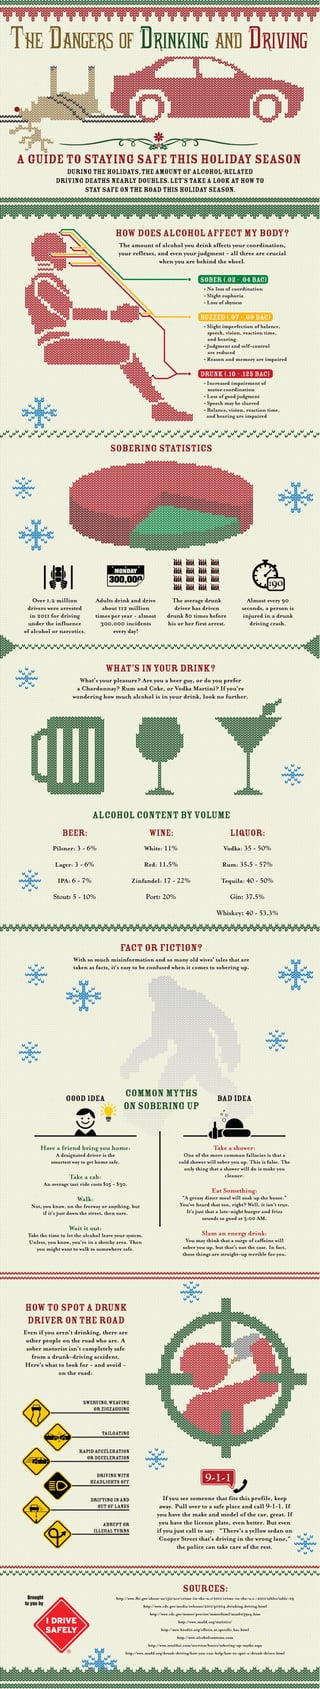 Infographic: The Dangers of Drinking and Driving 